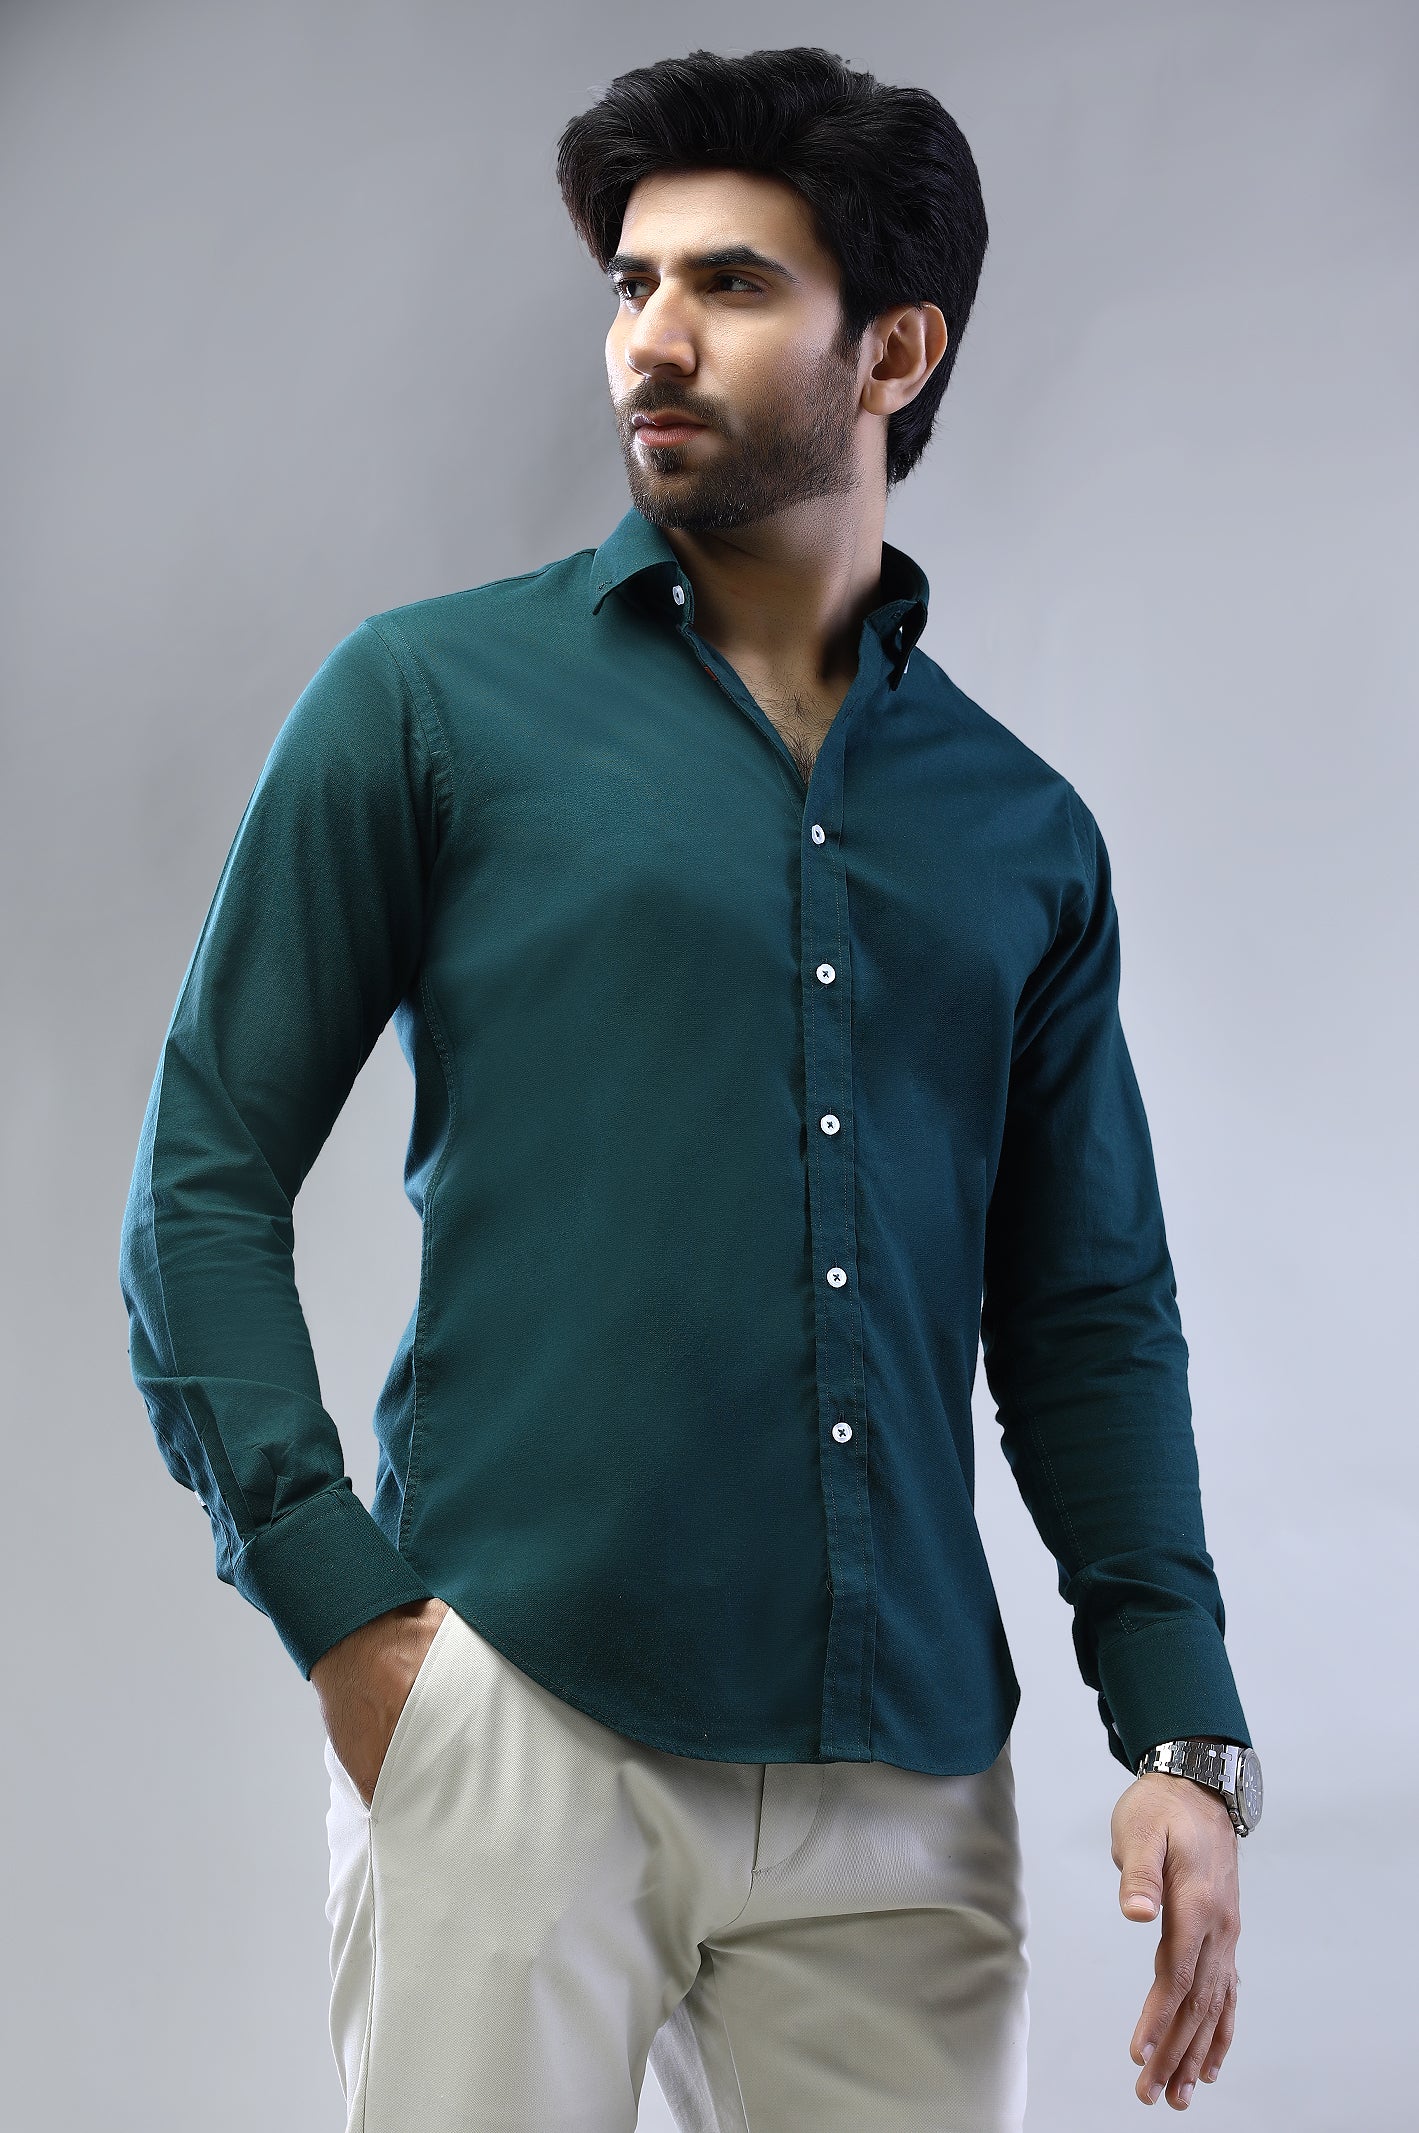 Green Plain Casual Shirt for Men - Diners